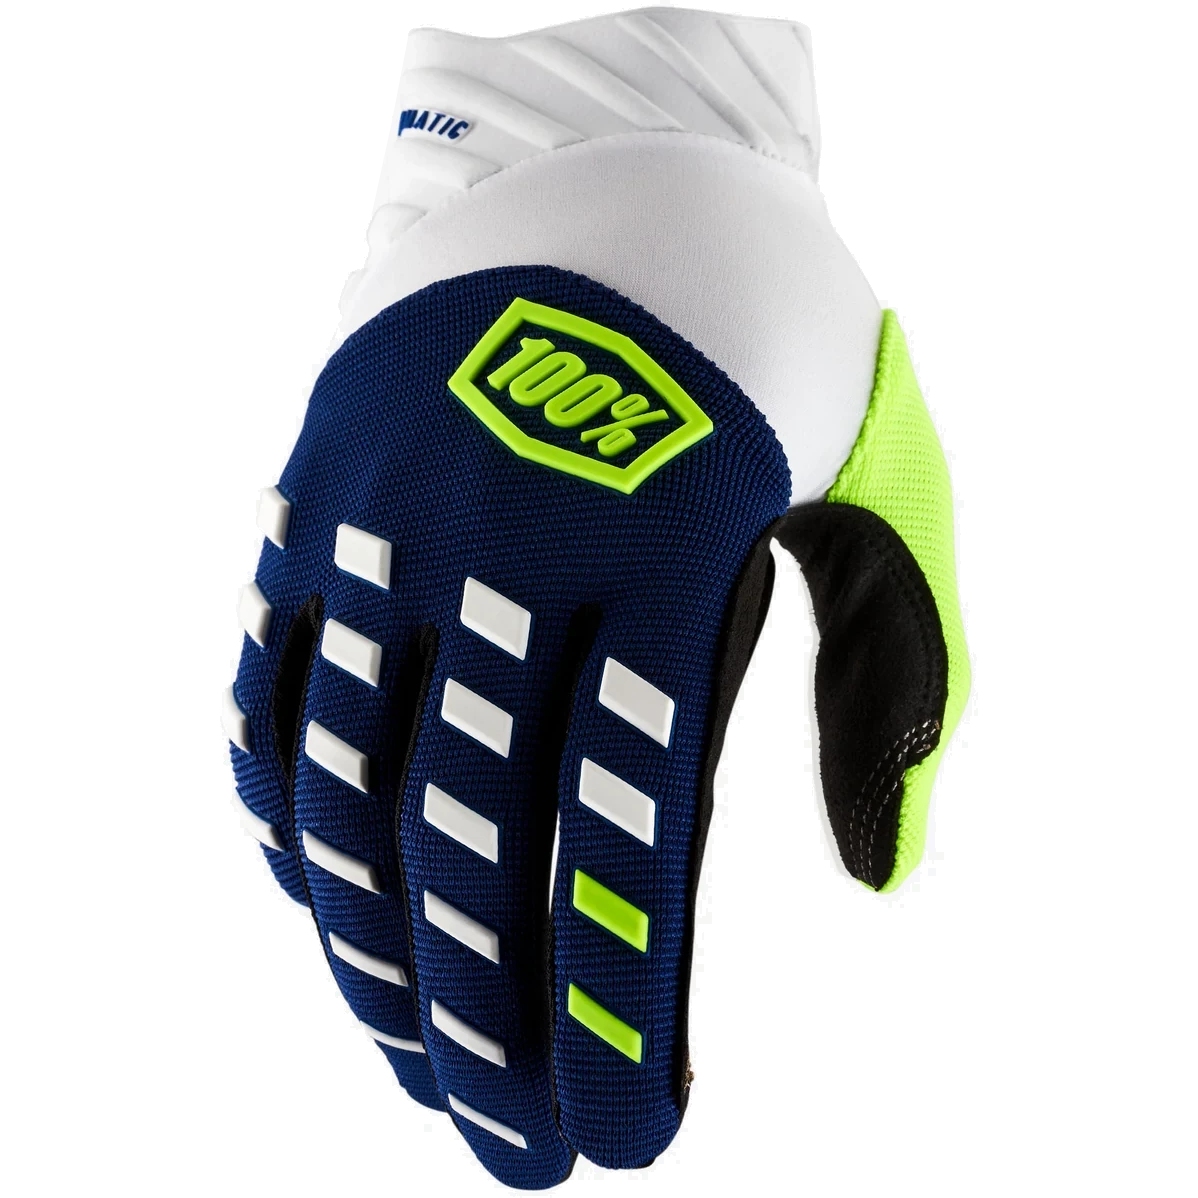 Picture of 100% Airmatic Bike Gloves - navy/white